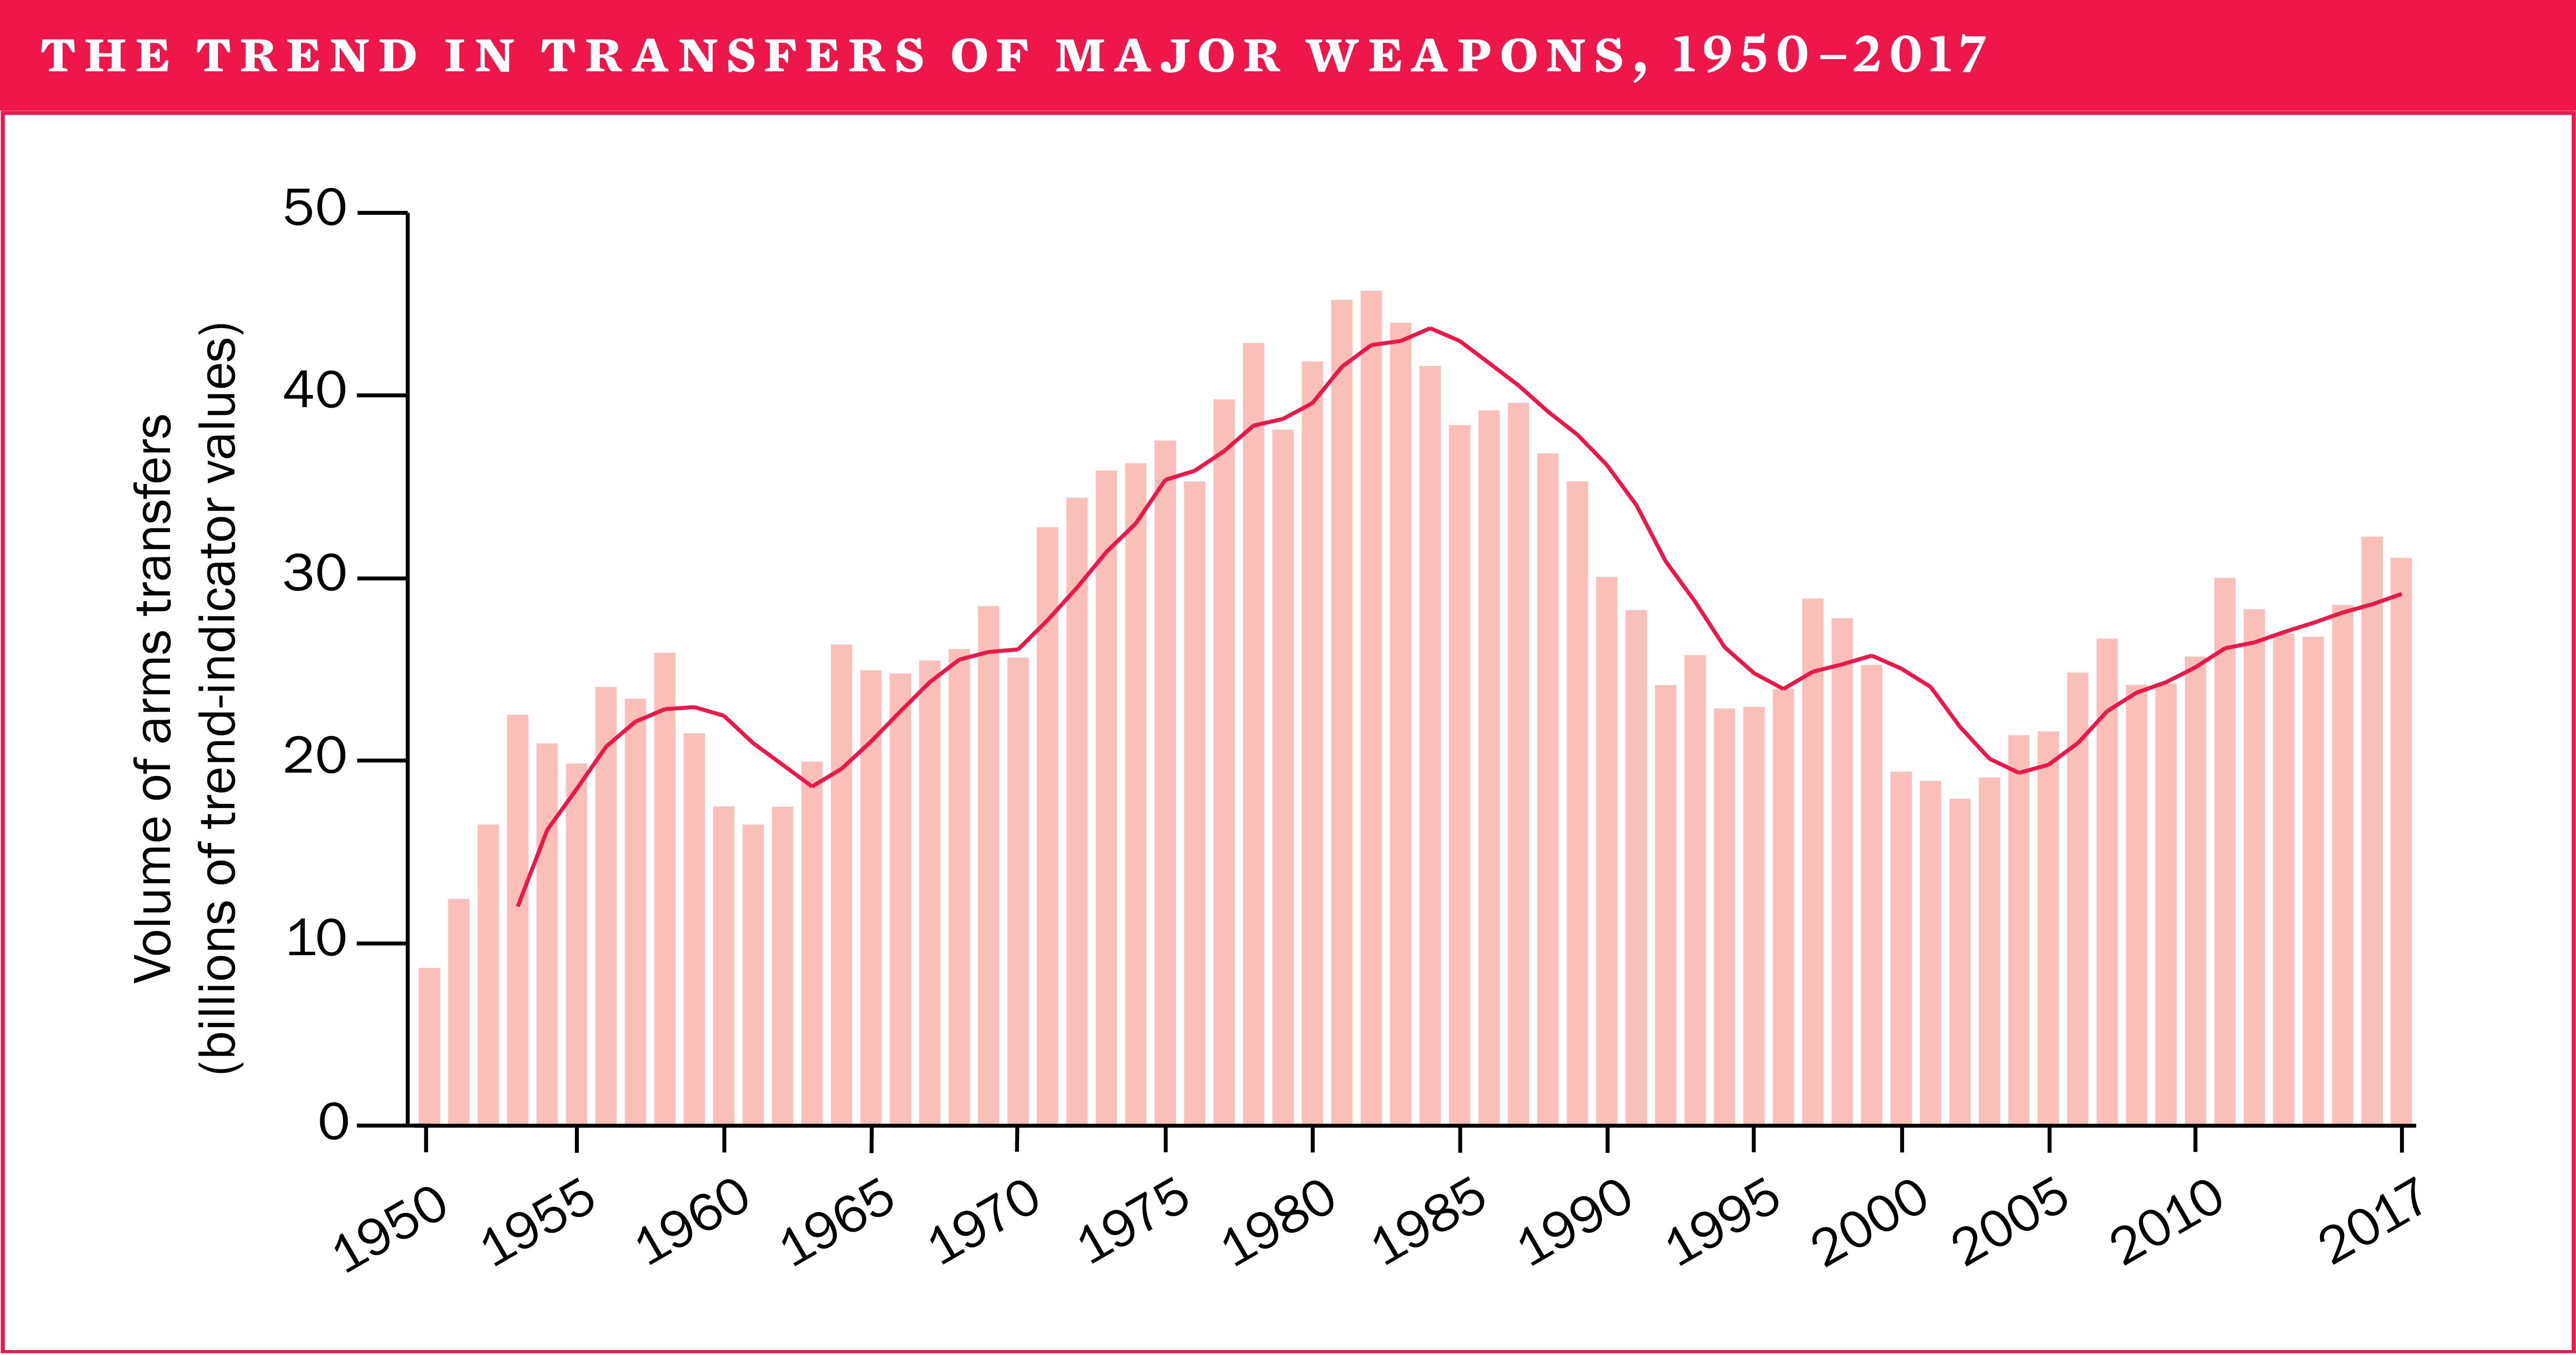 The trend in transfers of major weapons, 1950-2017